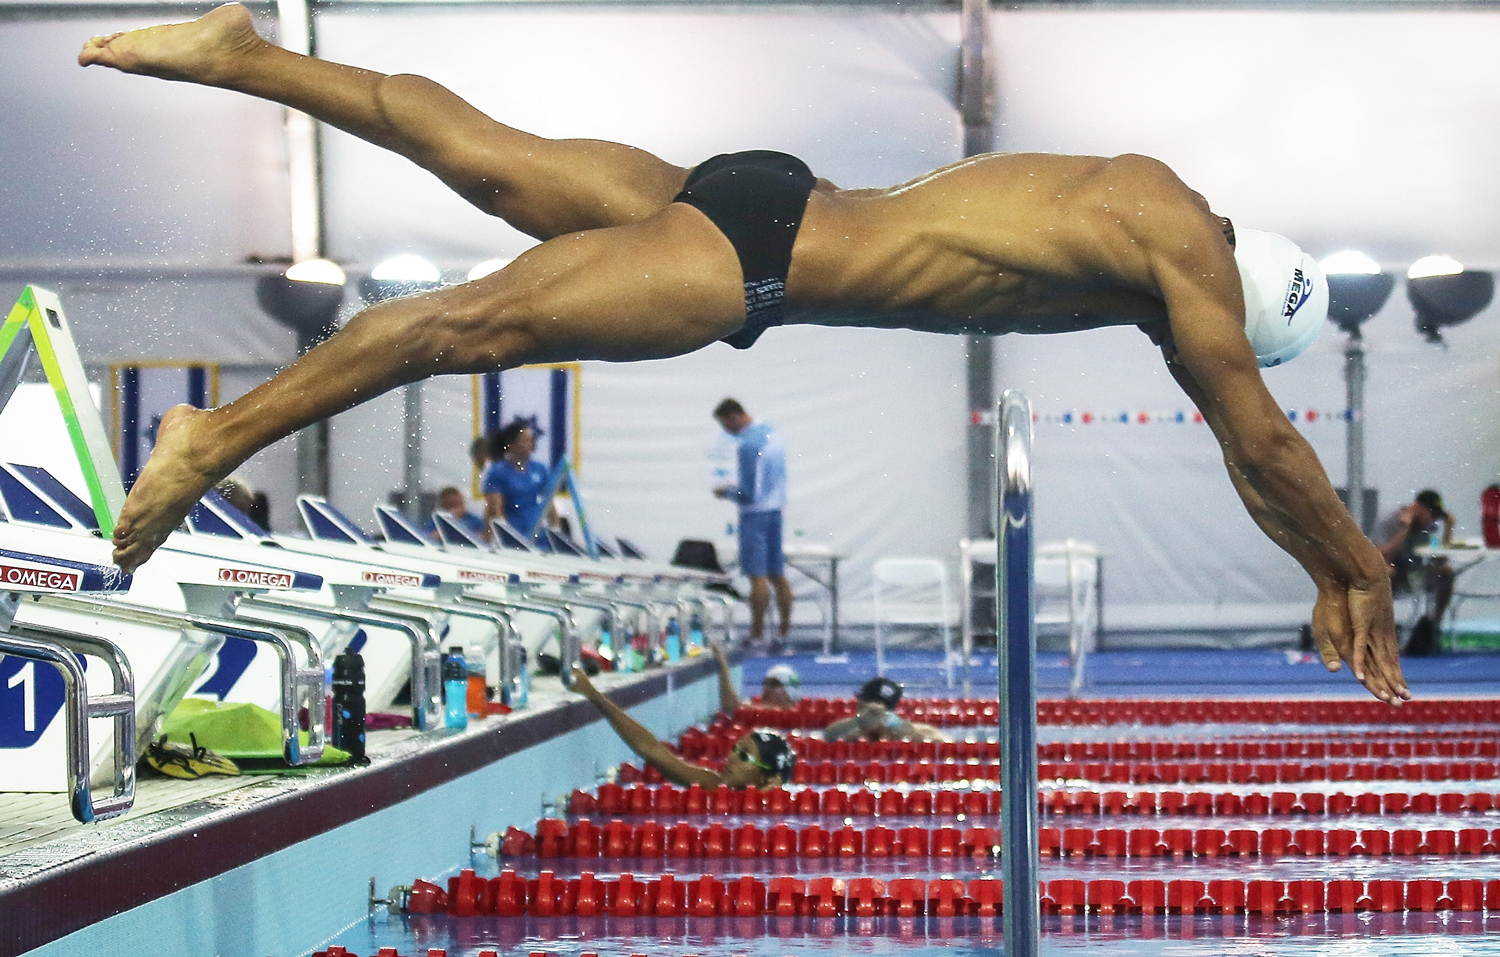 Rami Anis, an Olympic refugee team swimmer from Syria, dives while training at the Olympic Aquatics Stadium ahead of the opening ceremonies in Rio de Janeiro on July 28, 2016.